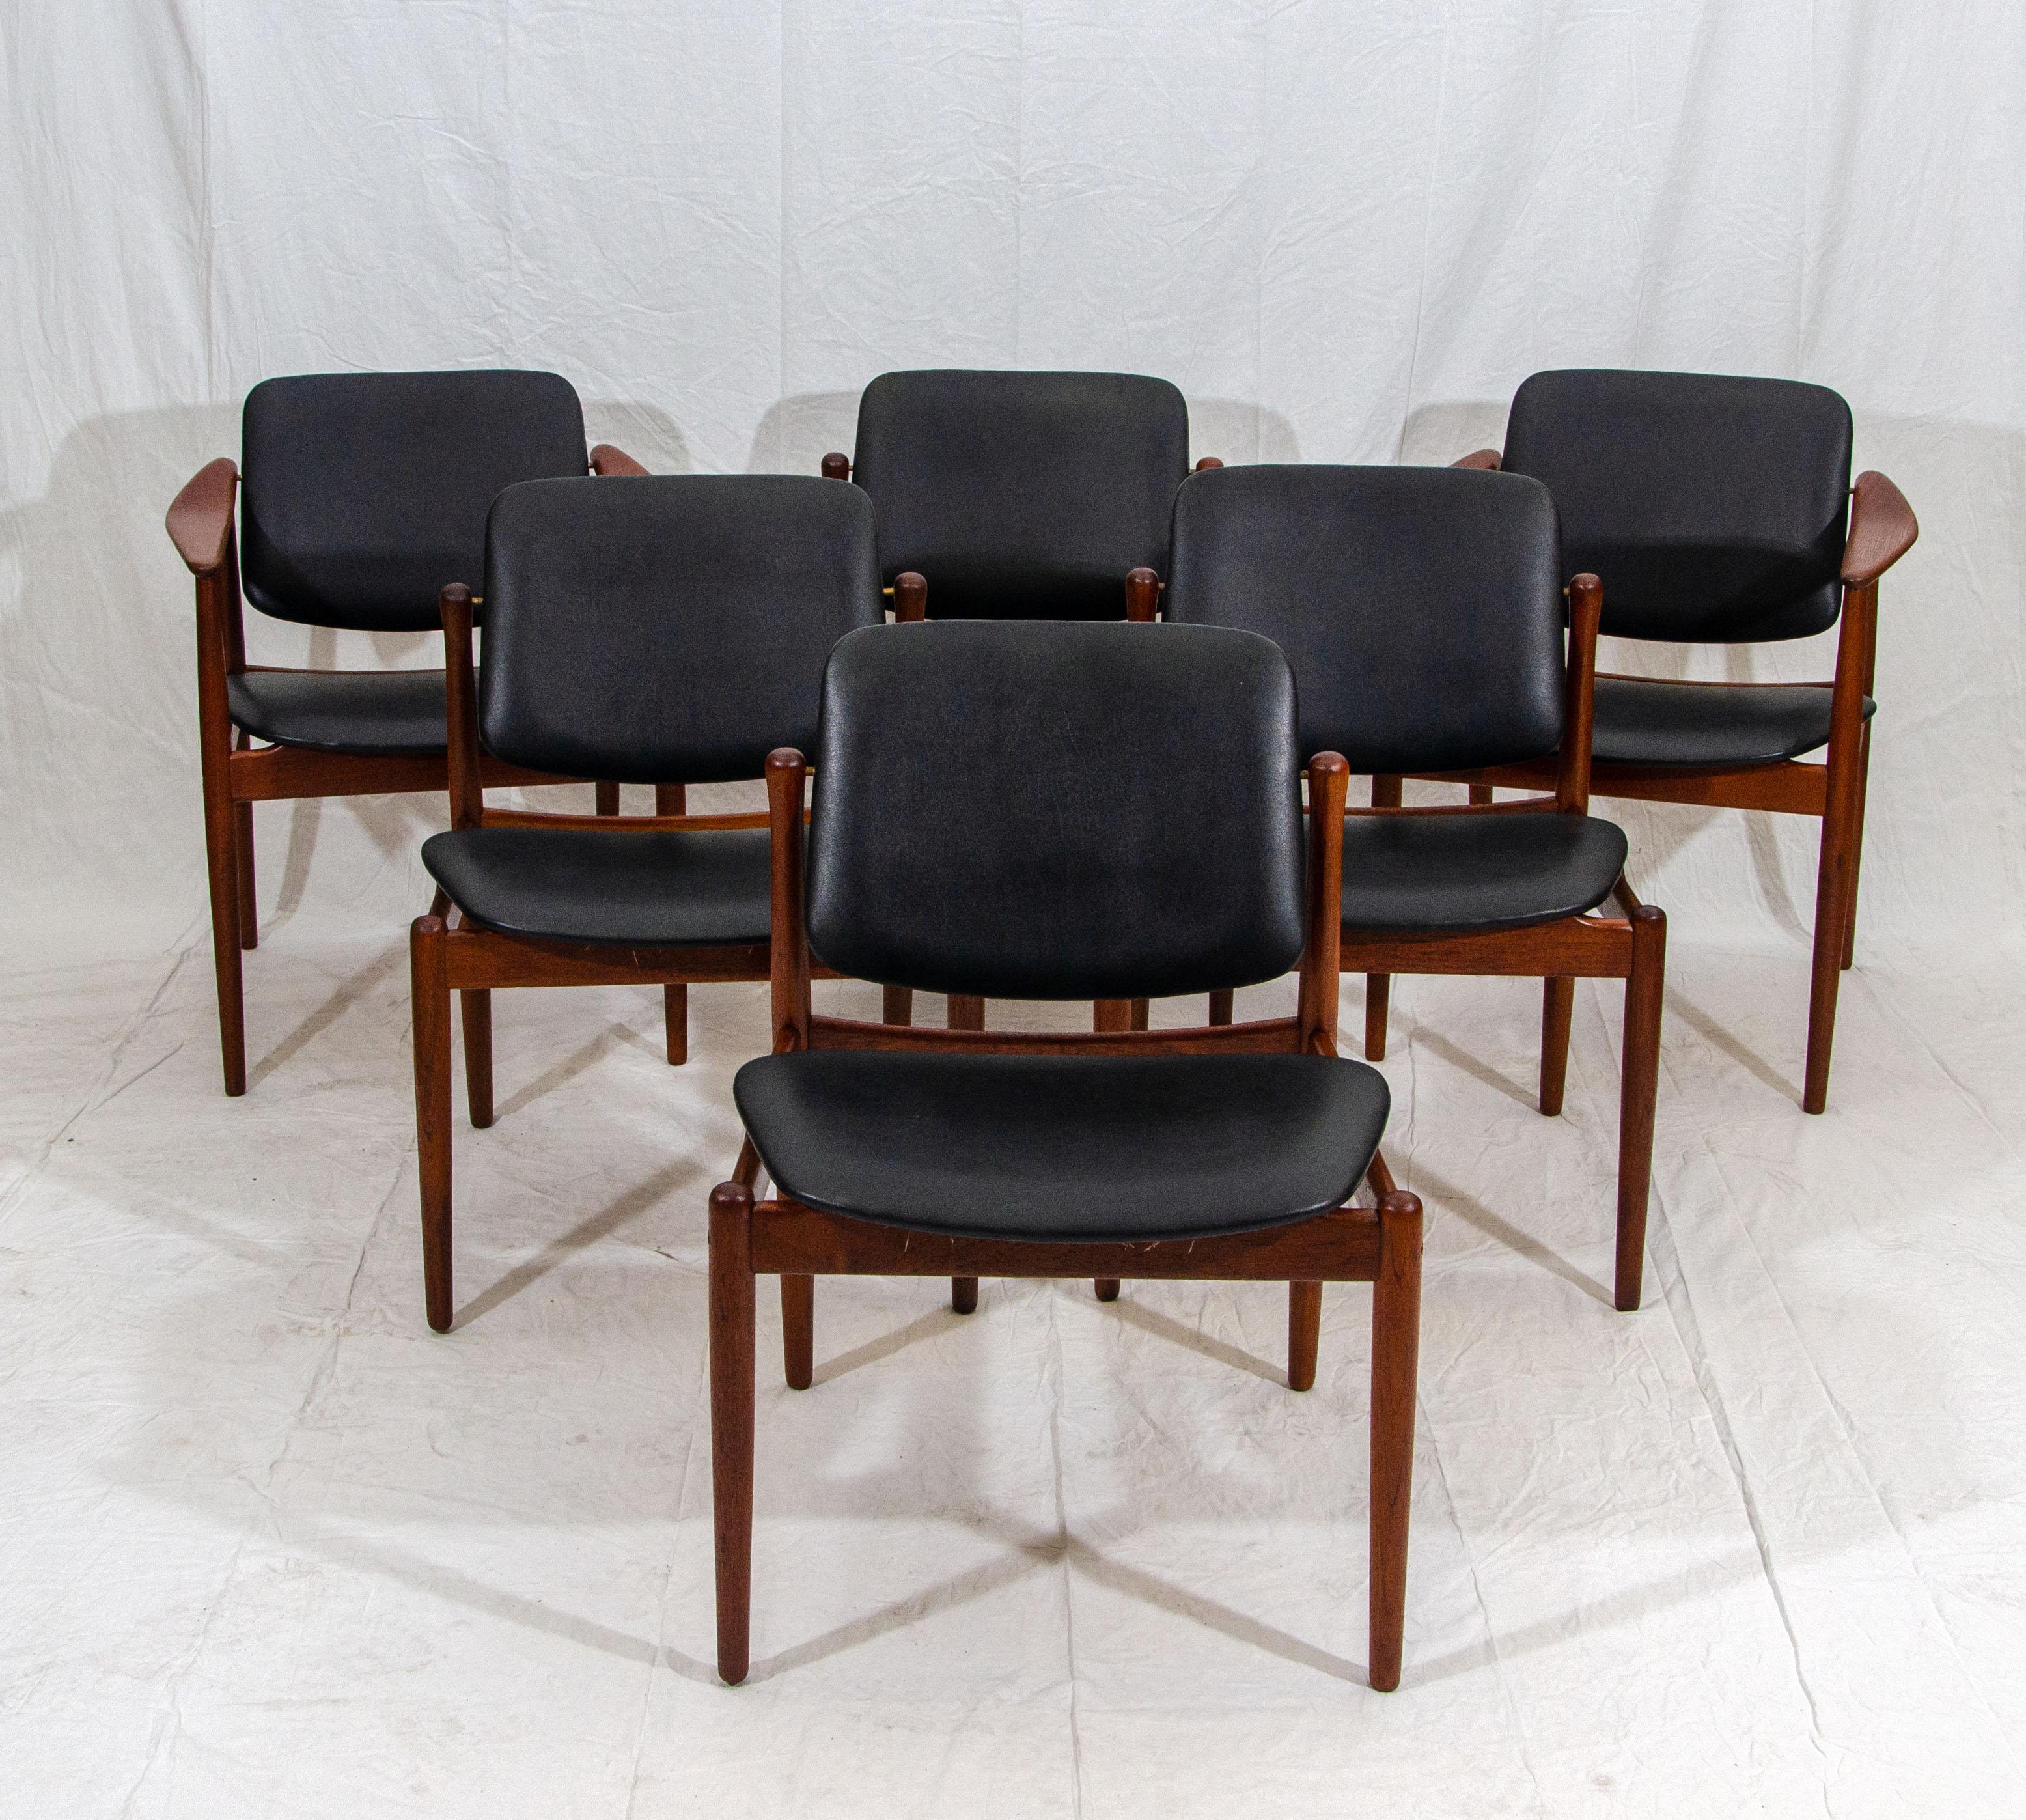 Seldom seen a set of unusual Danish teak dining chairs manufactured by Bovirke (model BO92) and designed by Arne Vodder. The backs tilt for comfortable seating and the black faux leather upholstery is original with a few very minor imperfections too